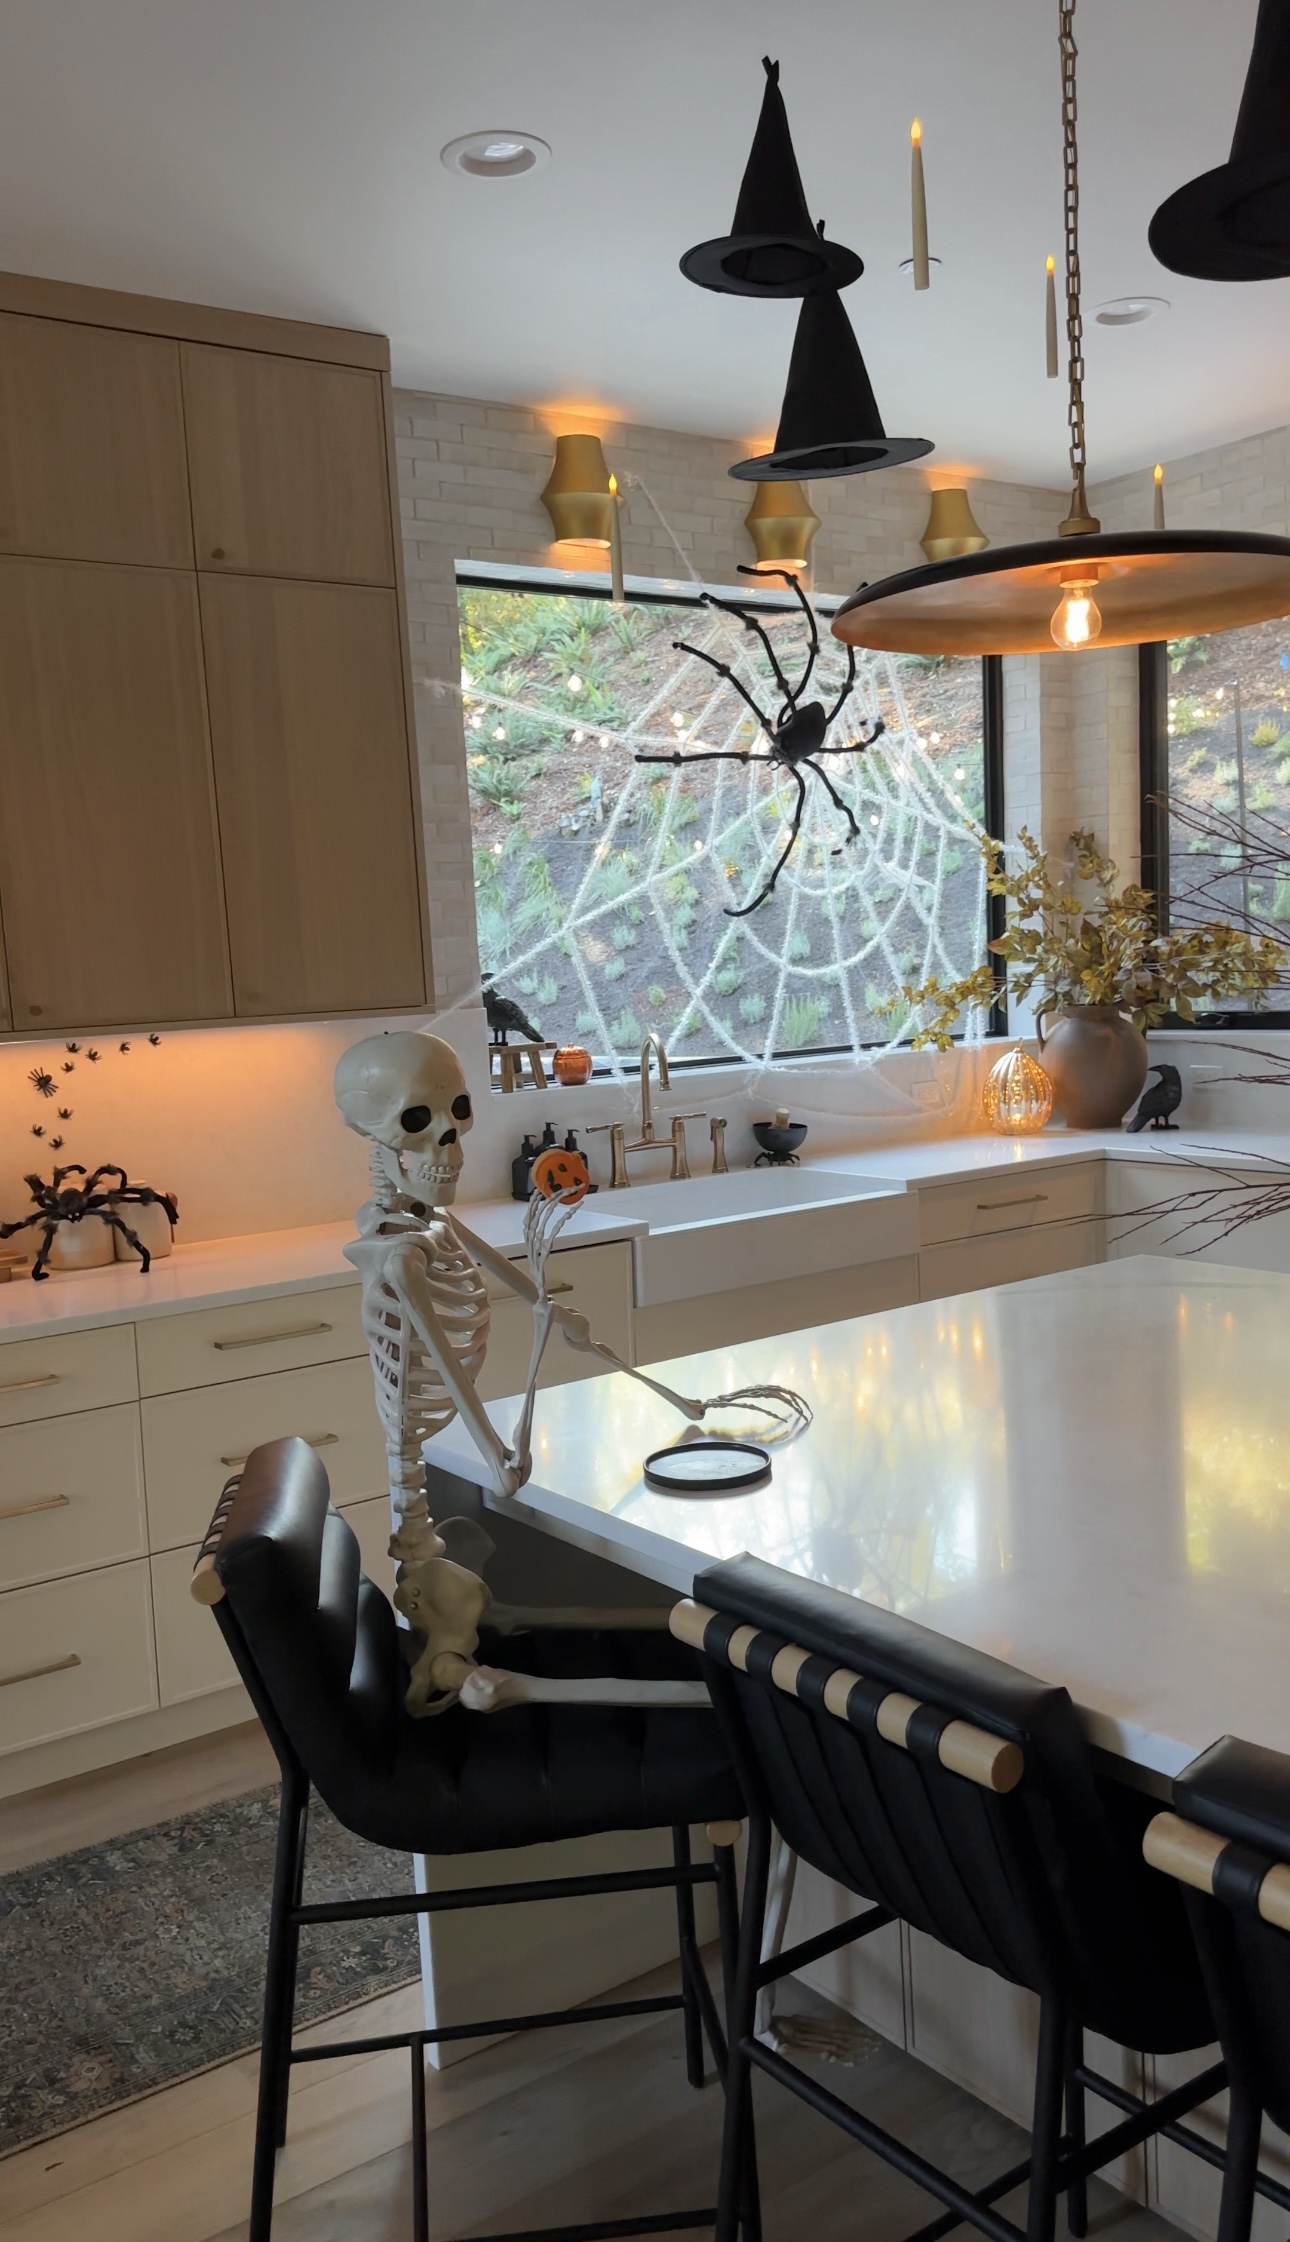 Halloween decor ideas for party, how to decorate for a halloween party, posable 60 skeleton - Sabrina Tan Home